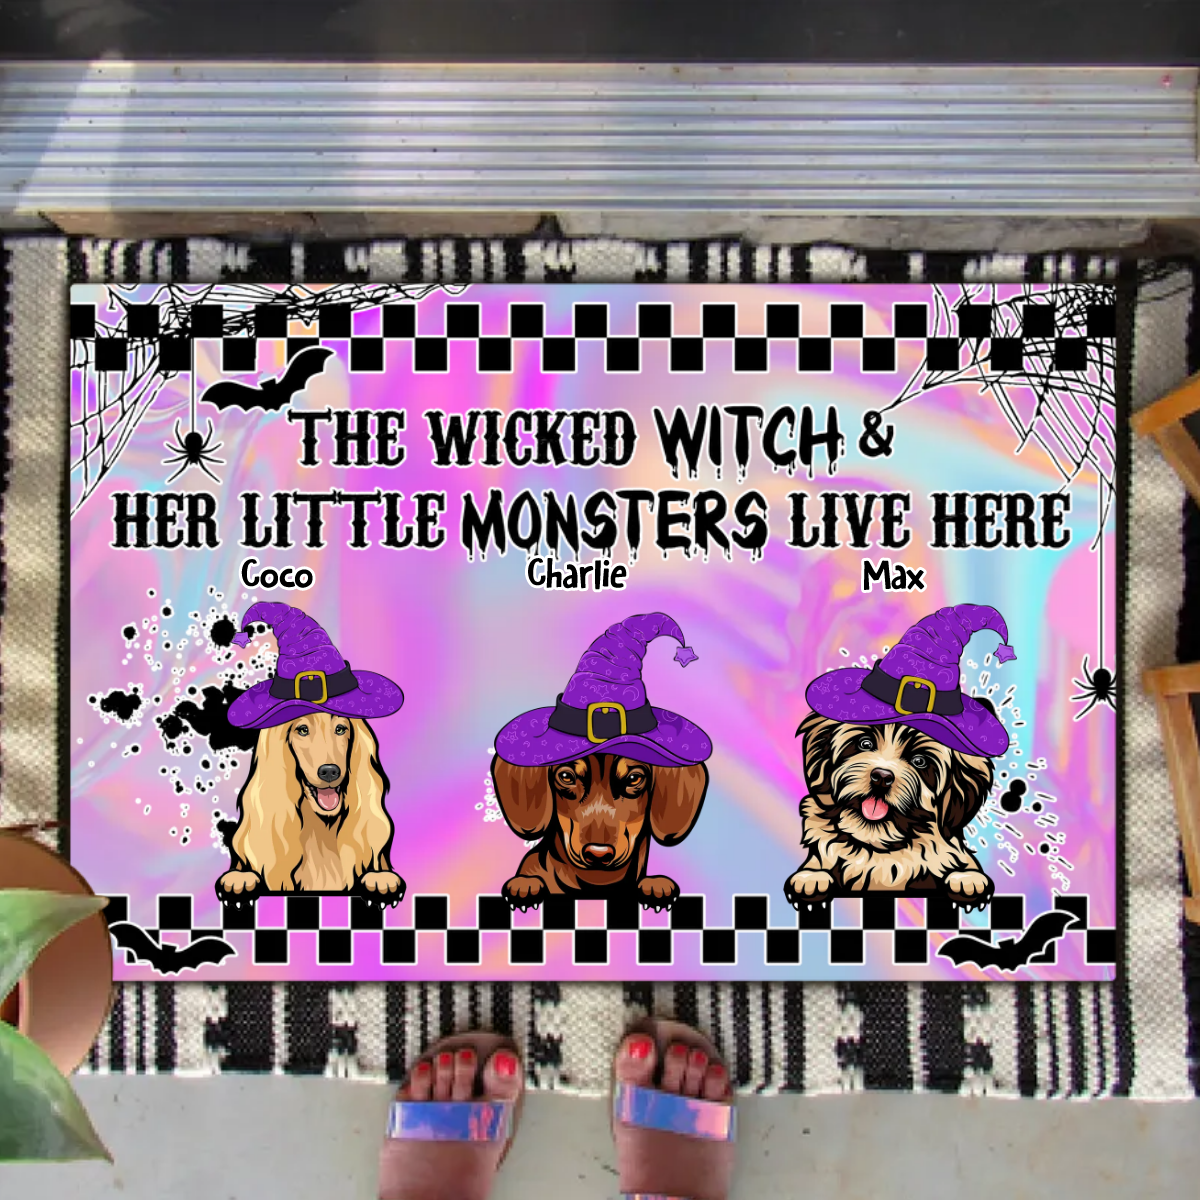 Wicked Witch Hologram Halloween Dogs Doormat, Dog Lover Gift AB